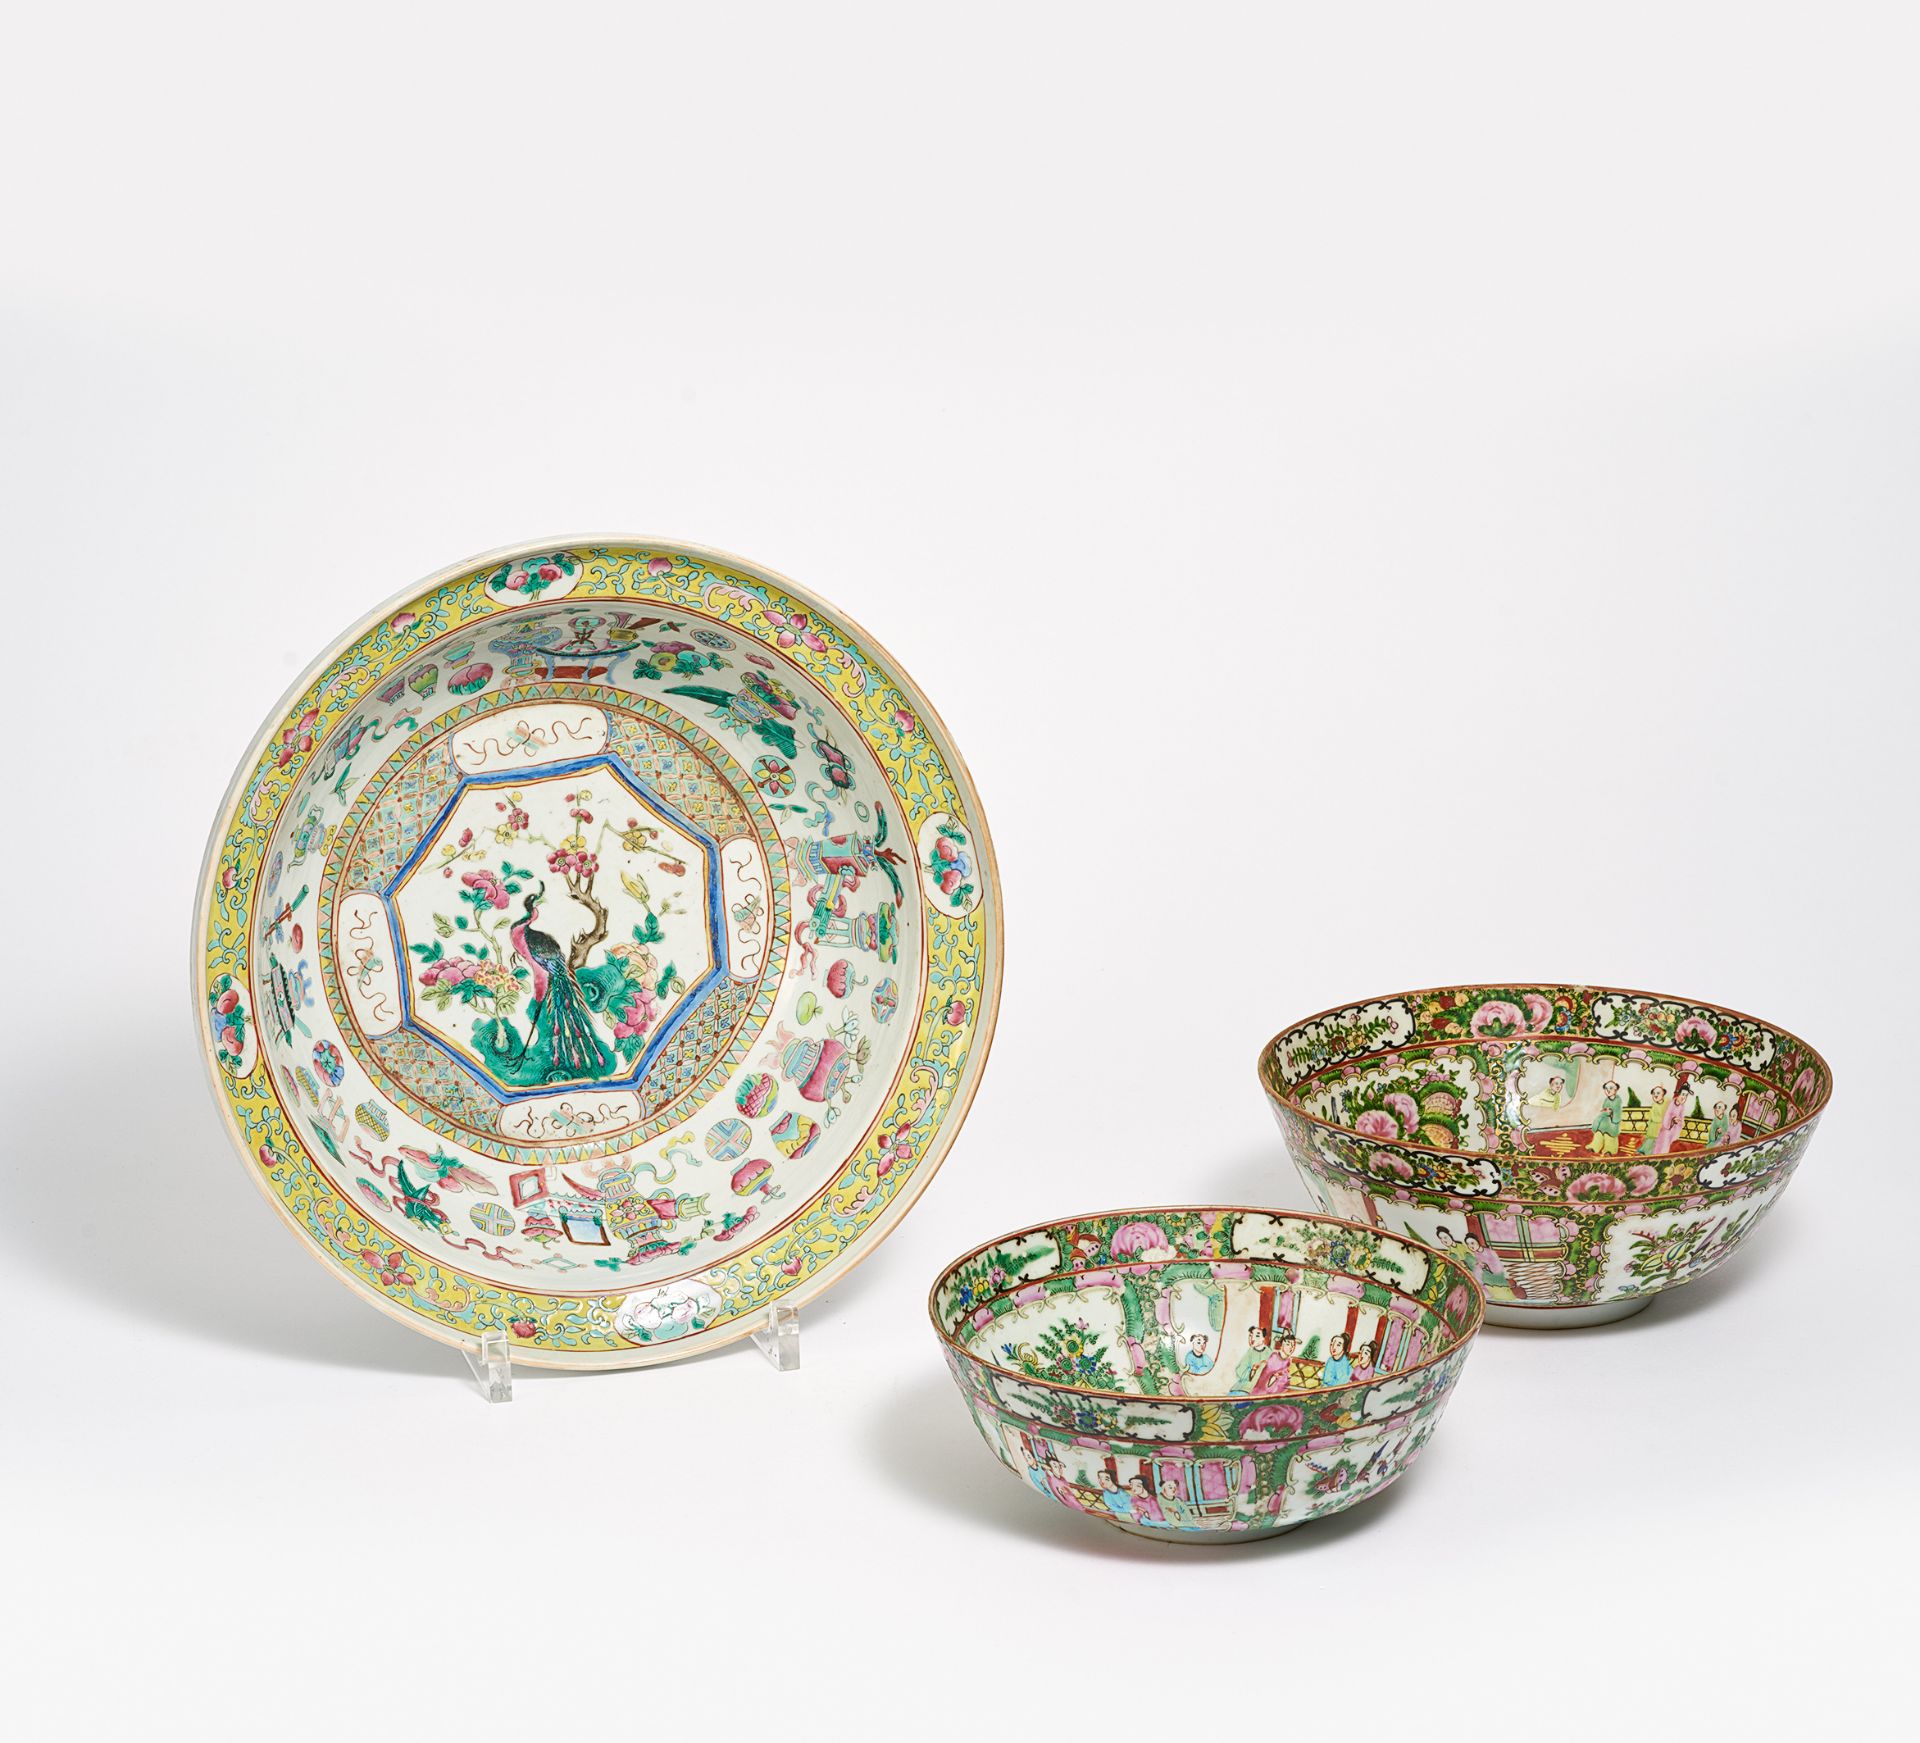 LARGE LAVABO AND TWO CANTON BOWLS. China. 19th-20th c. Porcelain painted in famille rose resp.